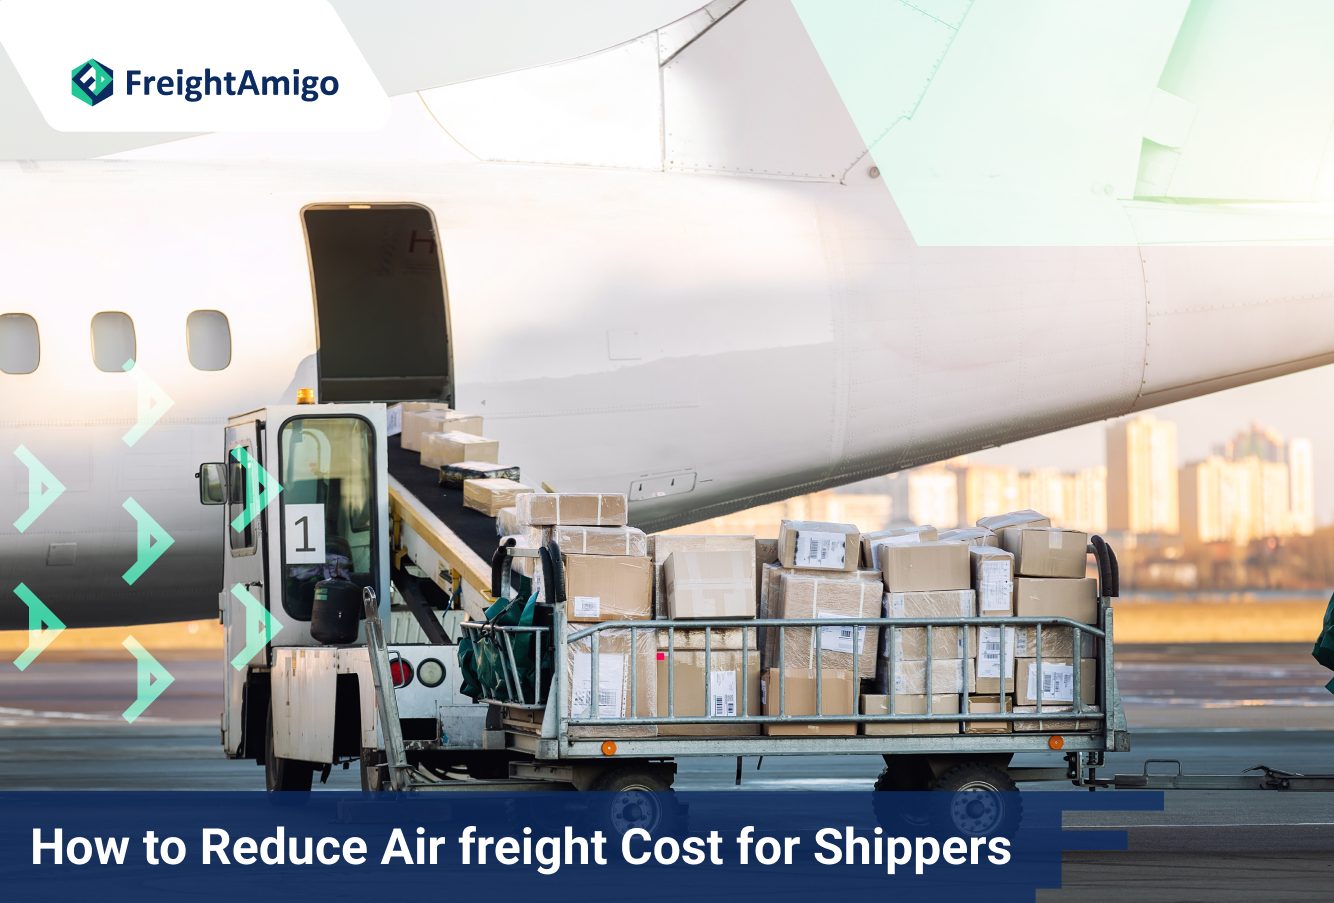 8 Ways to Reduce Air freight Cost for Shippers